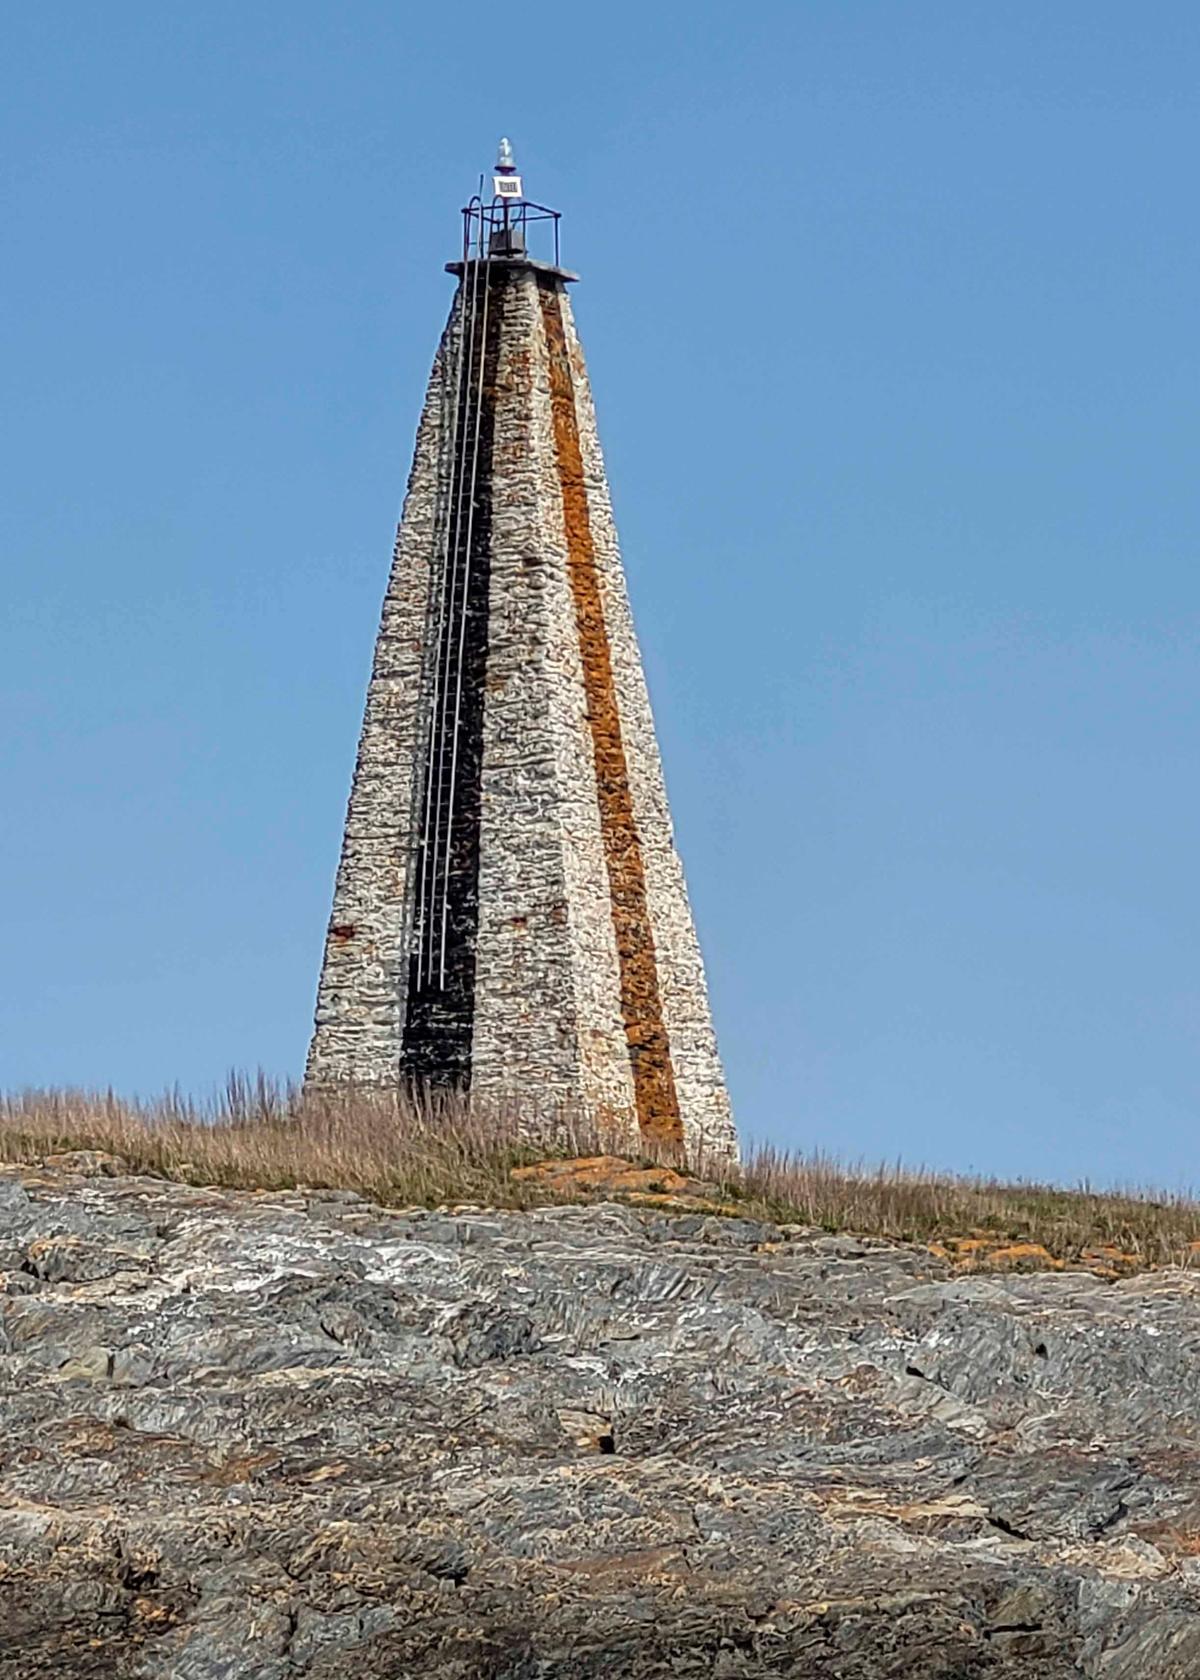 Little Mark Island and Monument stands between Broad Sound and Casco Bay off the coast of Harpswell, Maine. (Barbara Salfity/General Services Administration via AP)